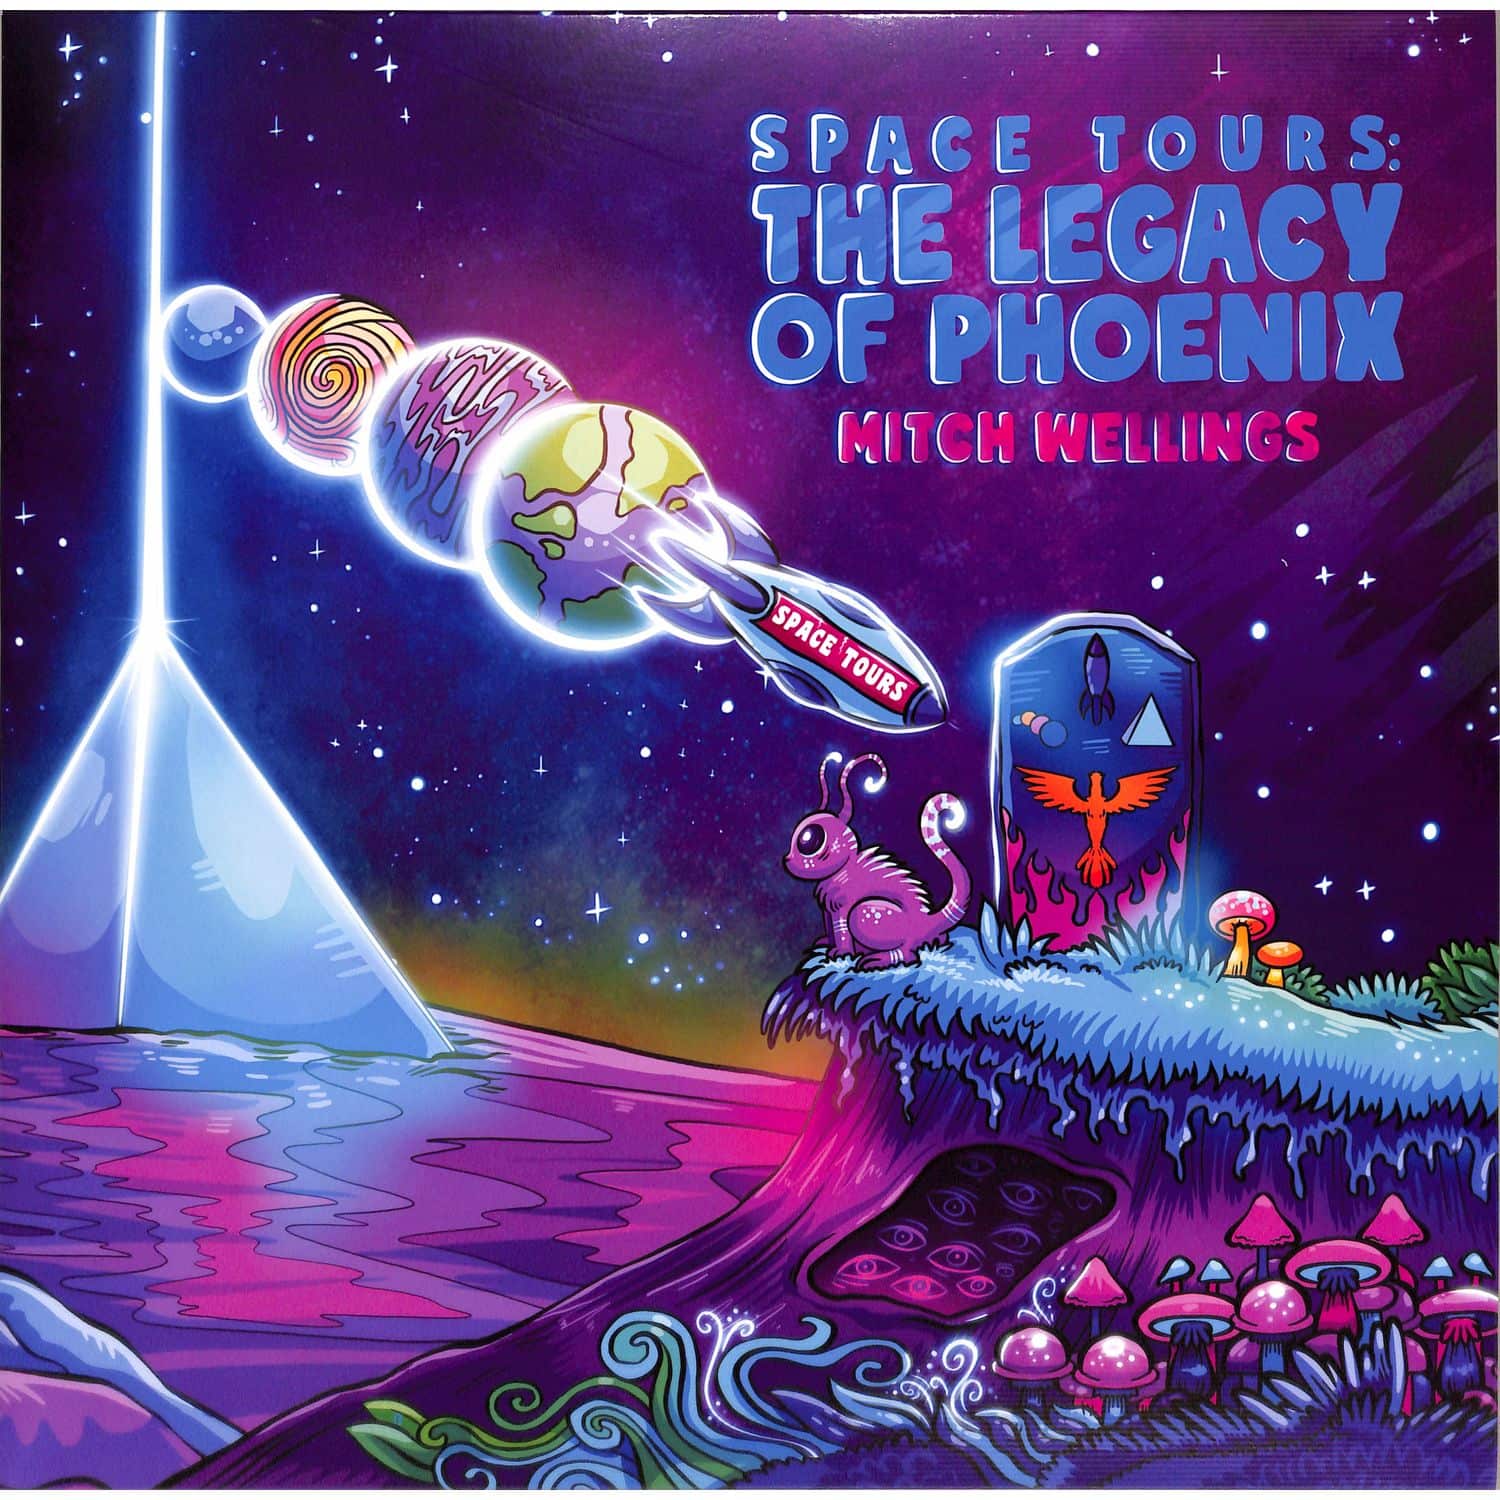 Mitch Wellings - SPACE TOURS: THE LEGACY OF PHOENIX 